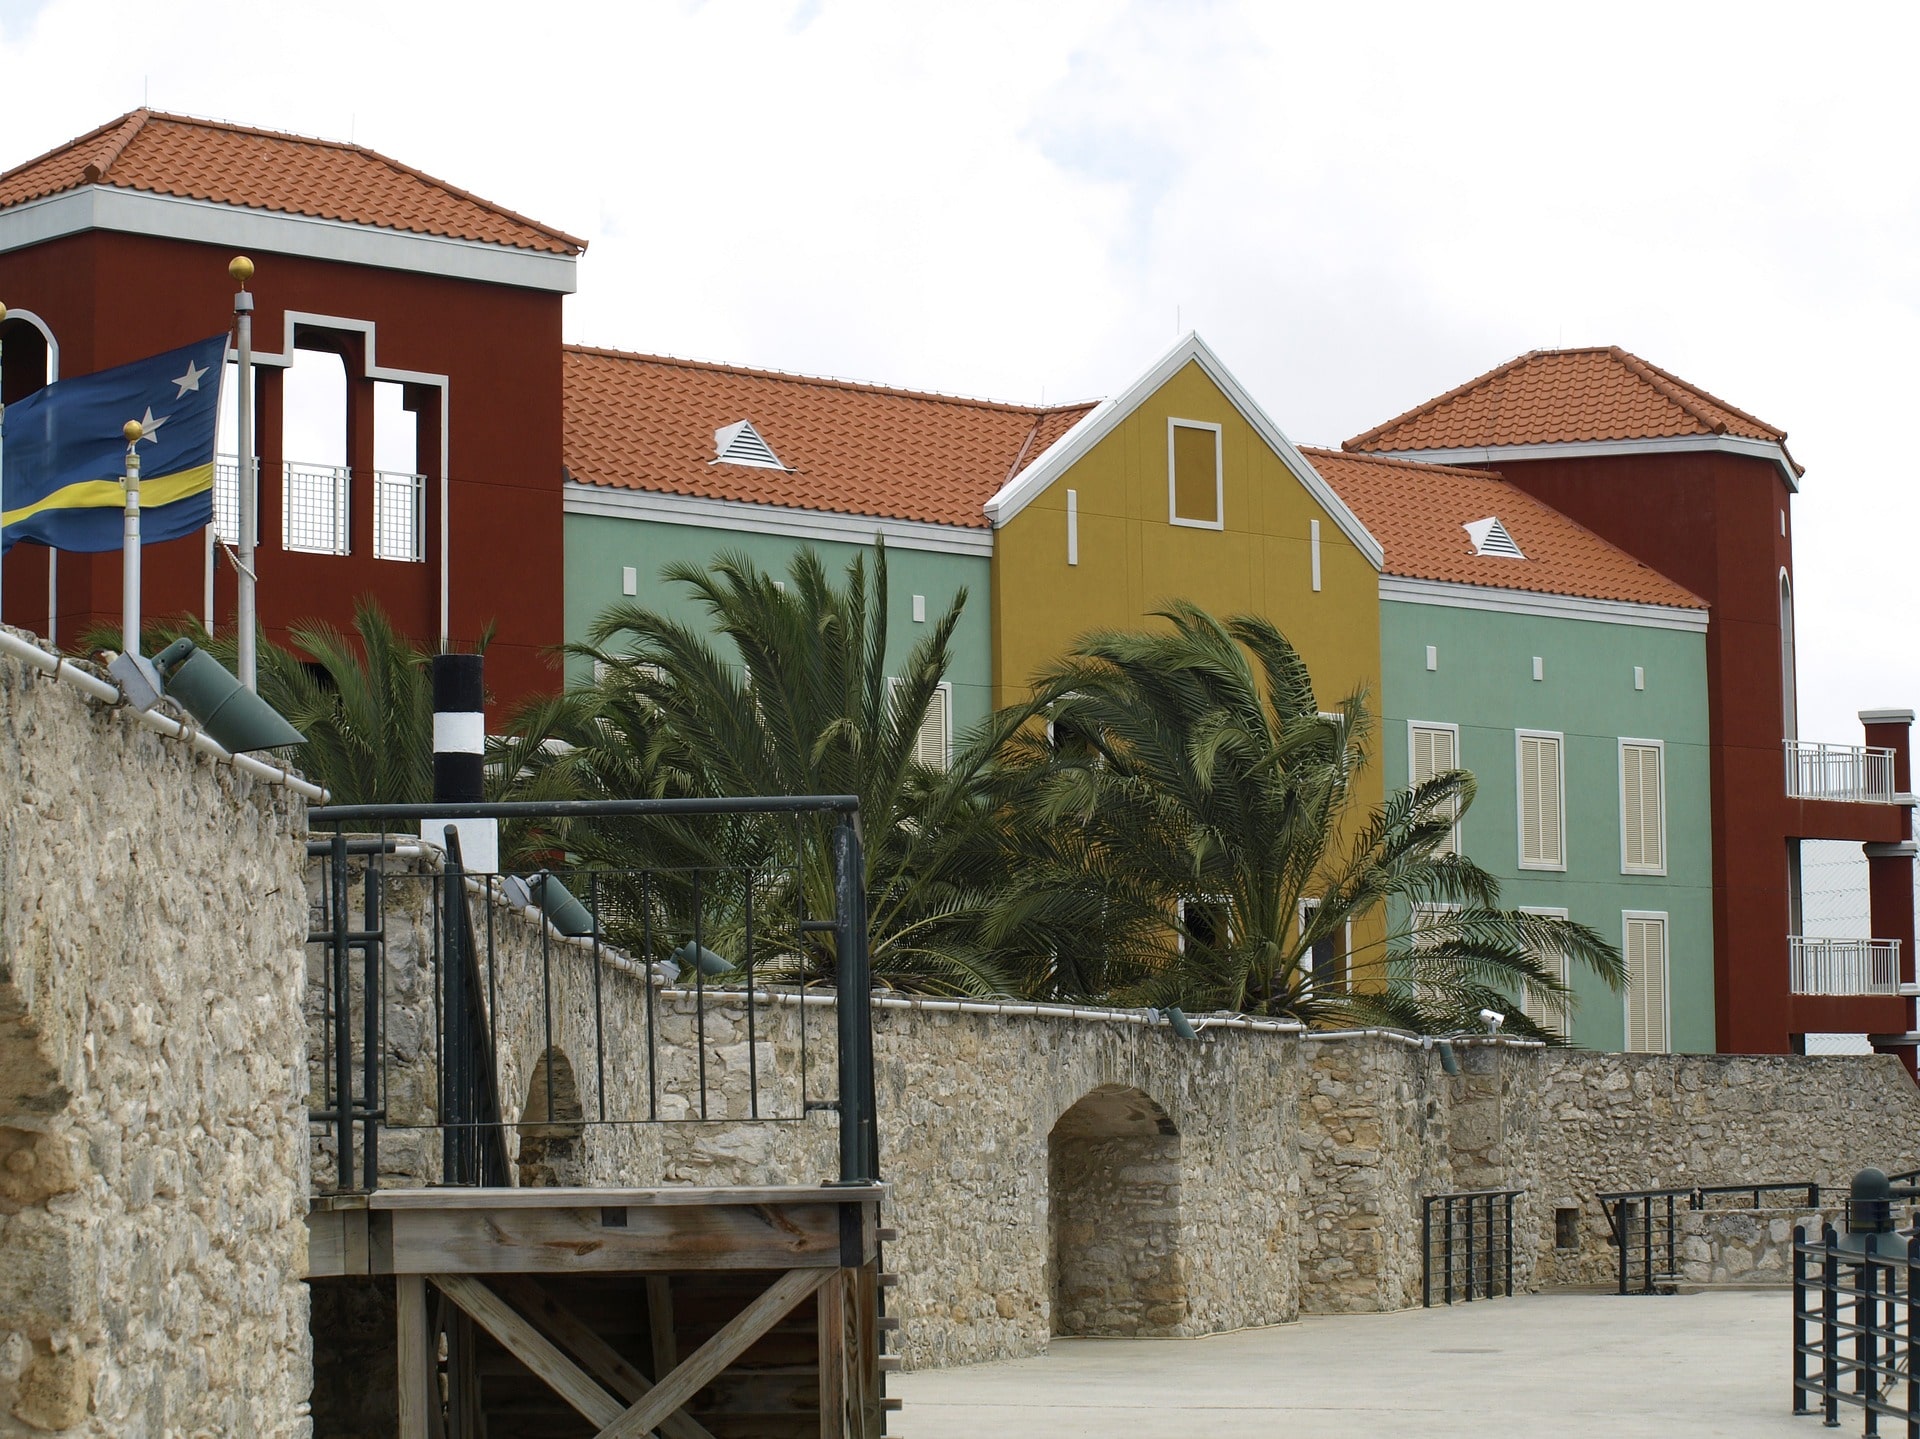 Curacao-Willemstad-Fort